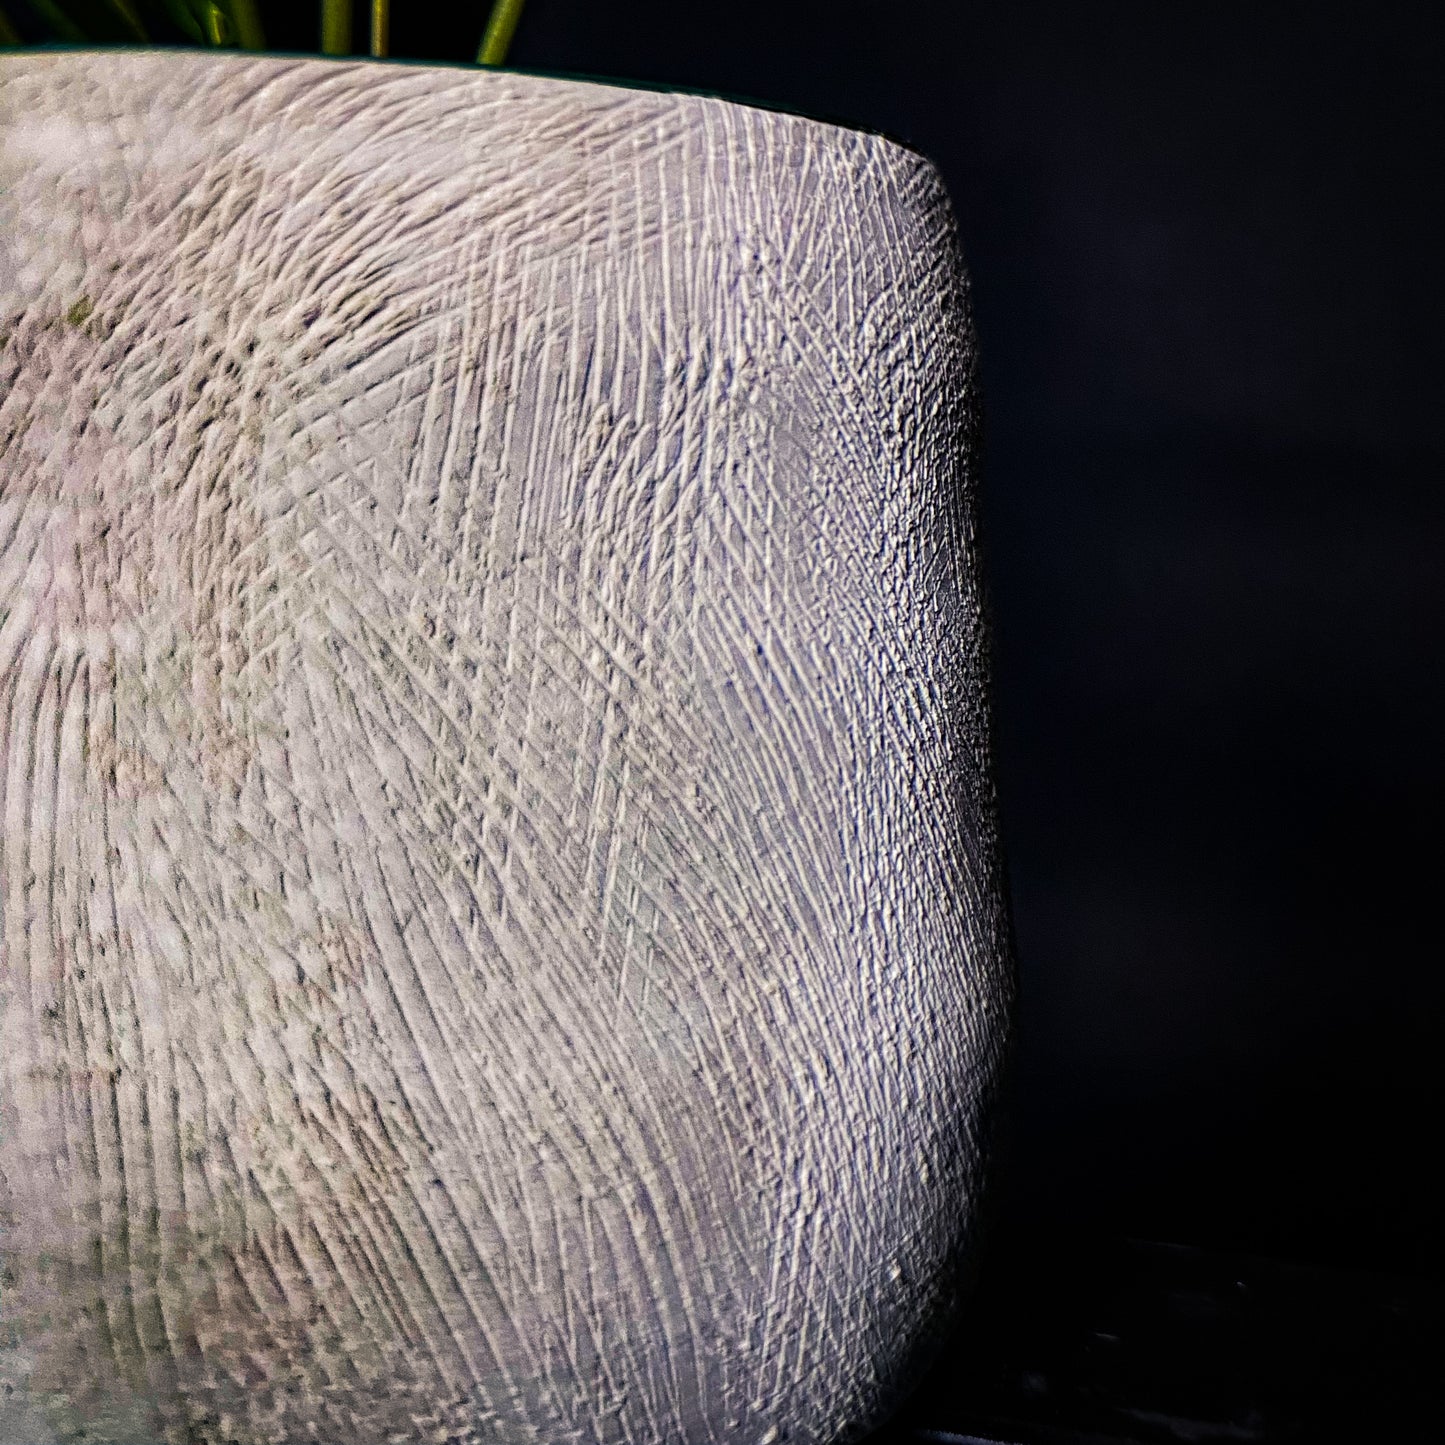 Plantpot holder - White clay, rough and textured finish